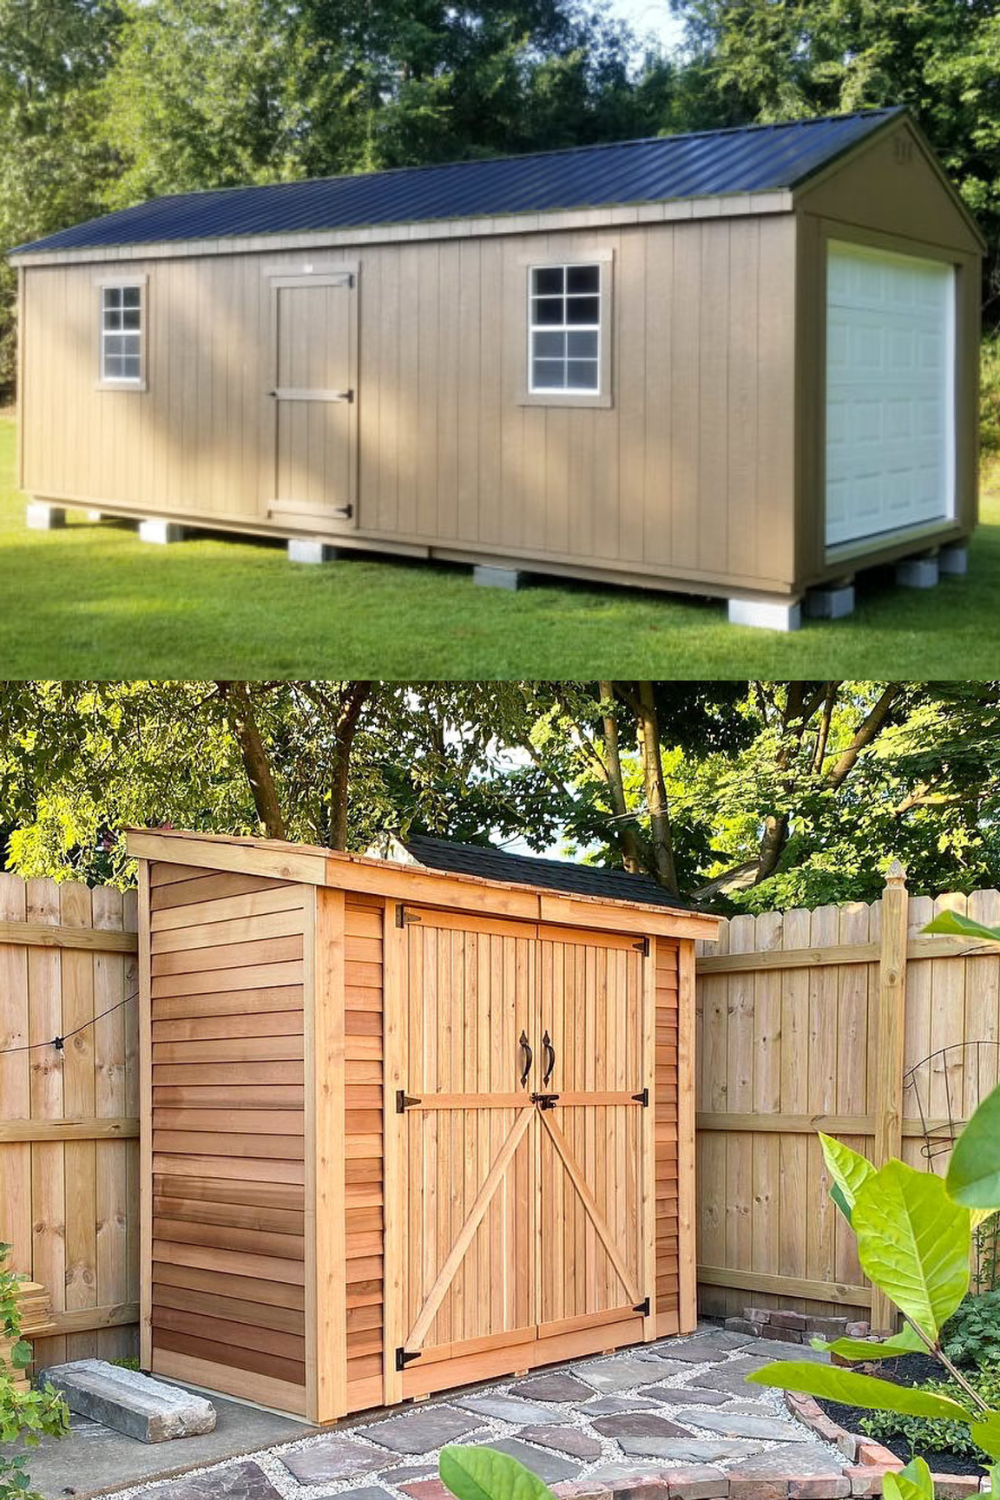 Discover the Durable Storage Solution: Rubbermaid Sheds